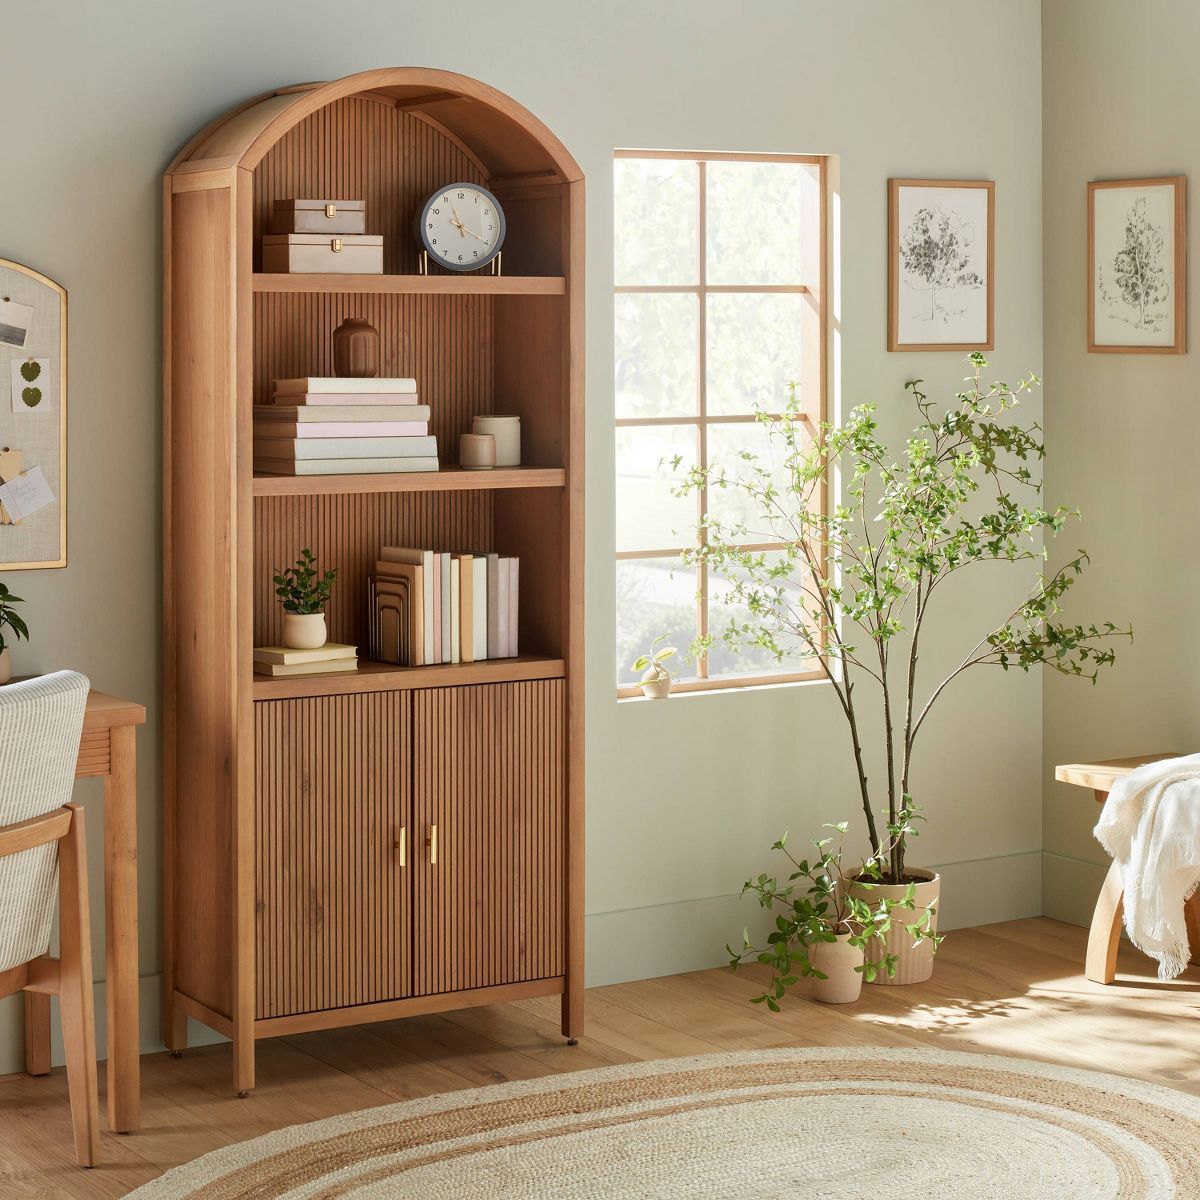 Grooved Wood Arch Bookcase Cabinet - Hearth & Hand™ with Magnolia | Target